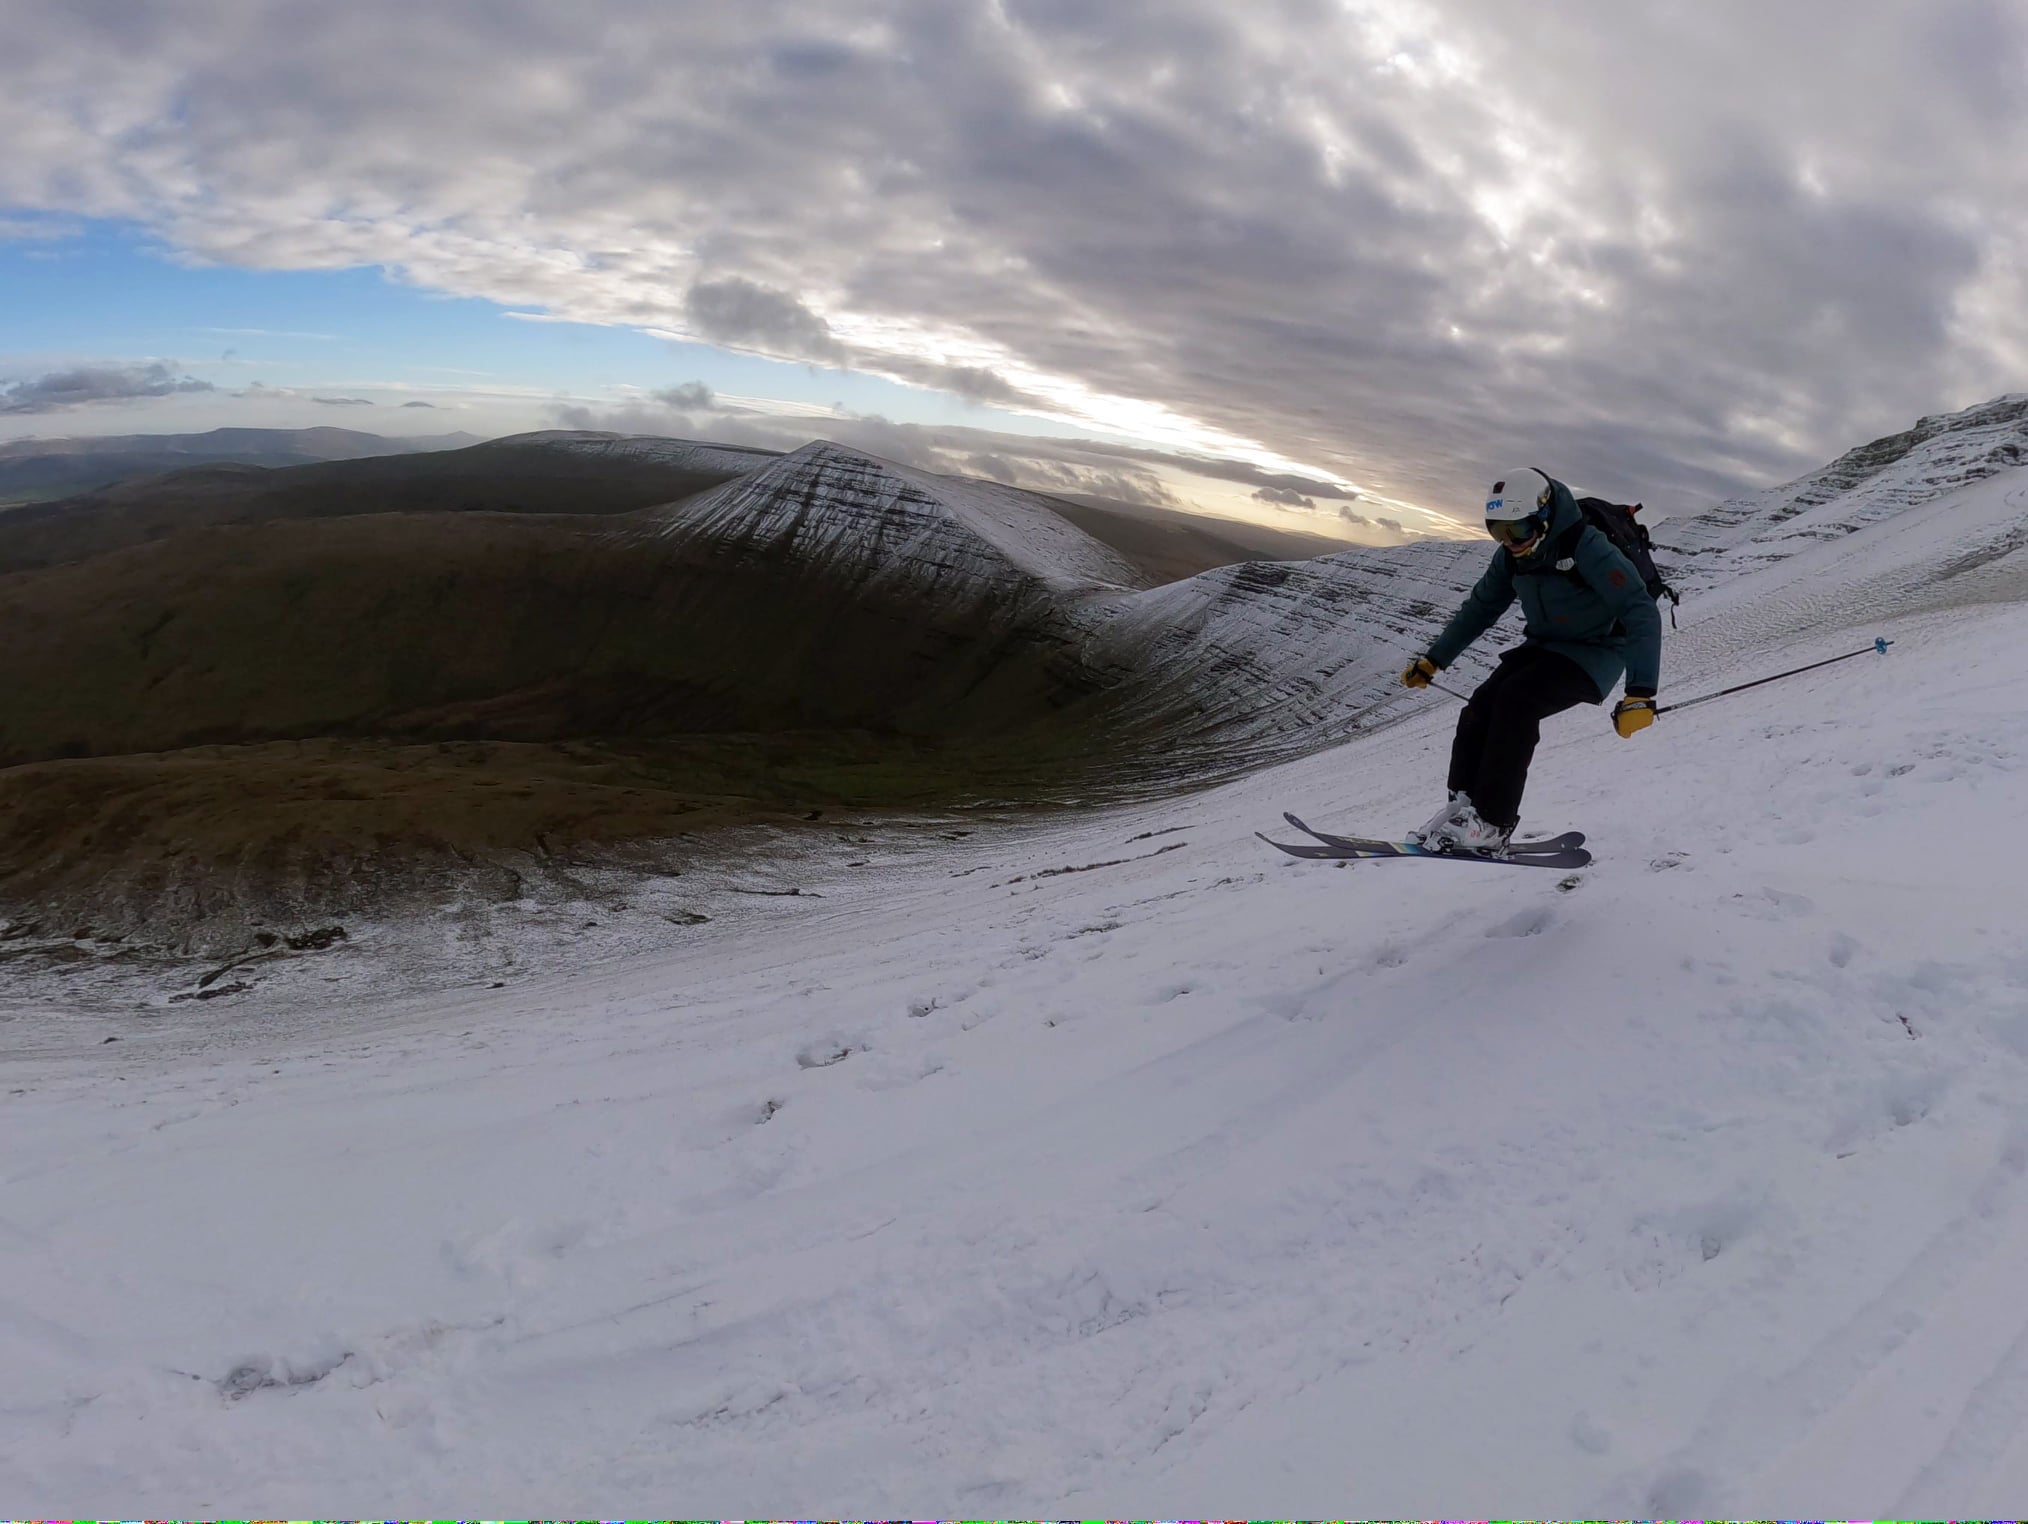 Chris is part of a group of skiiers who eschew the Alps for Welsh mountains